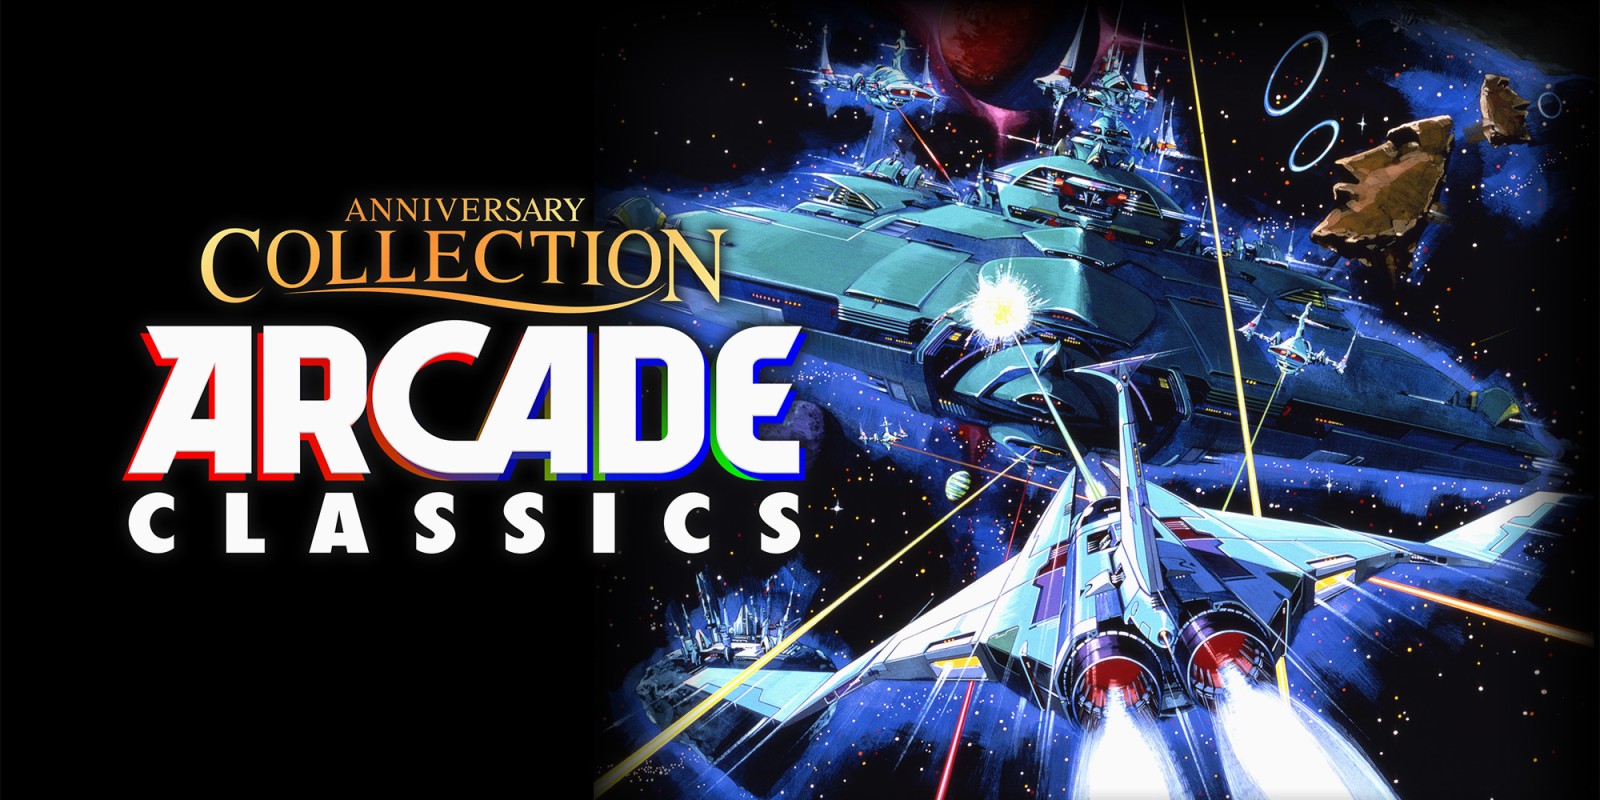 classic arcade games on switch